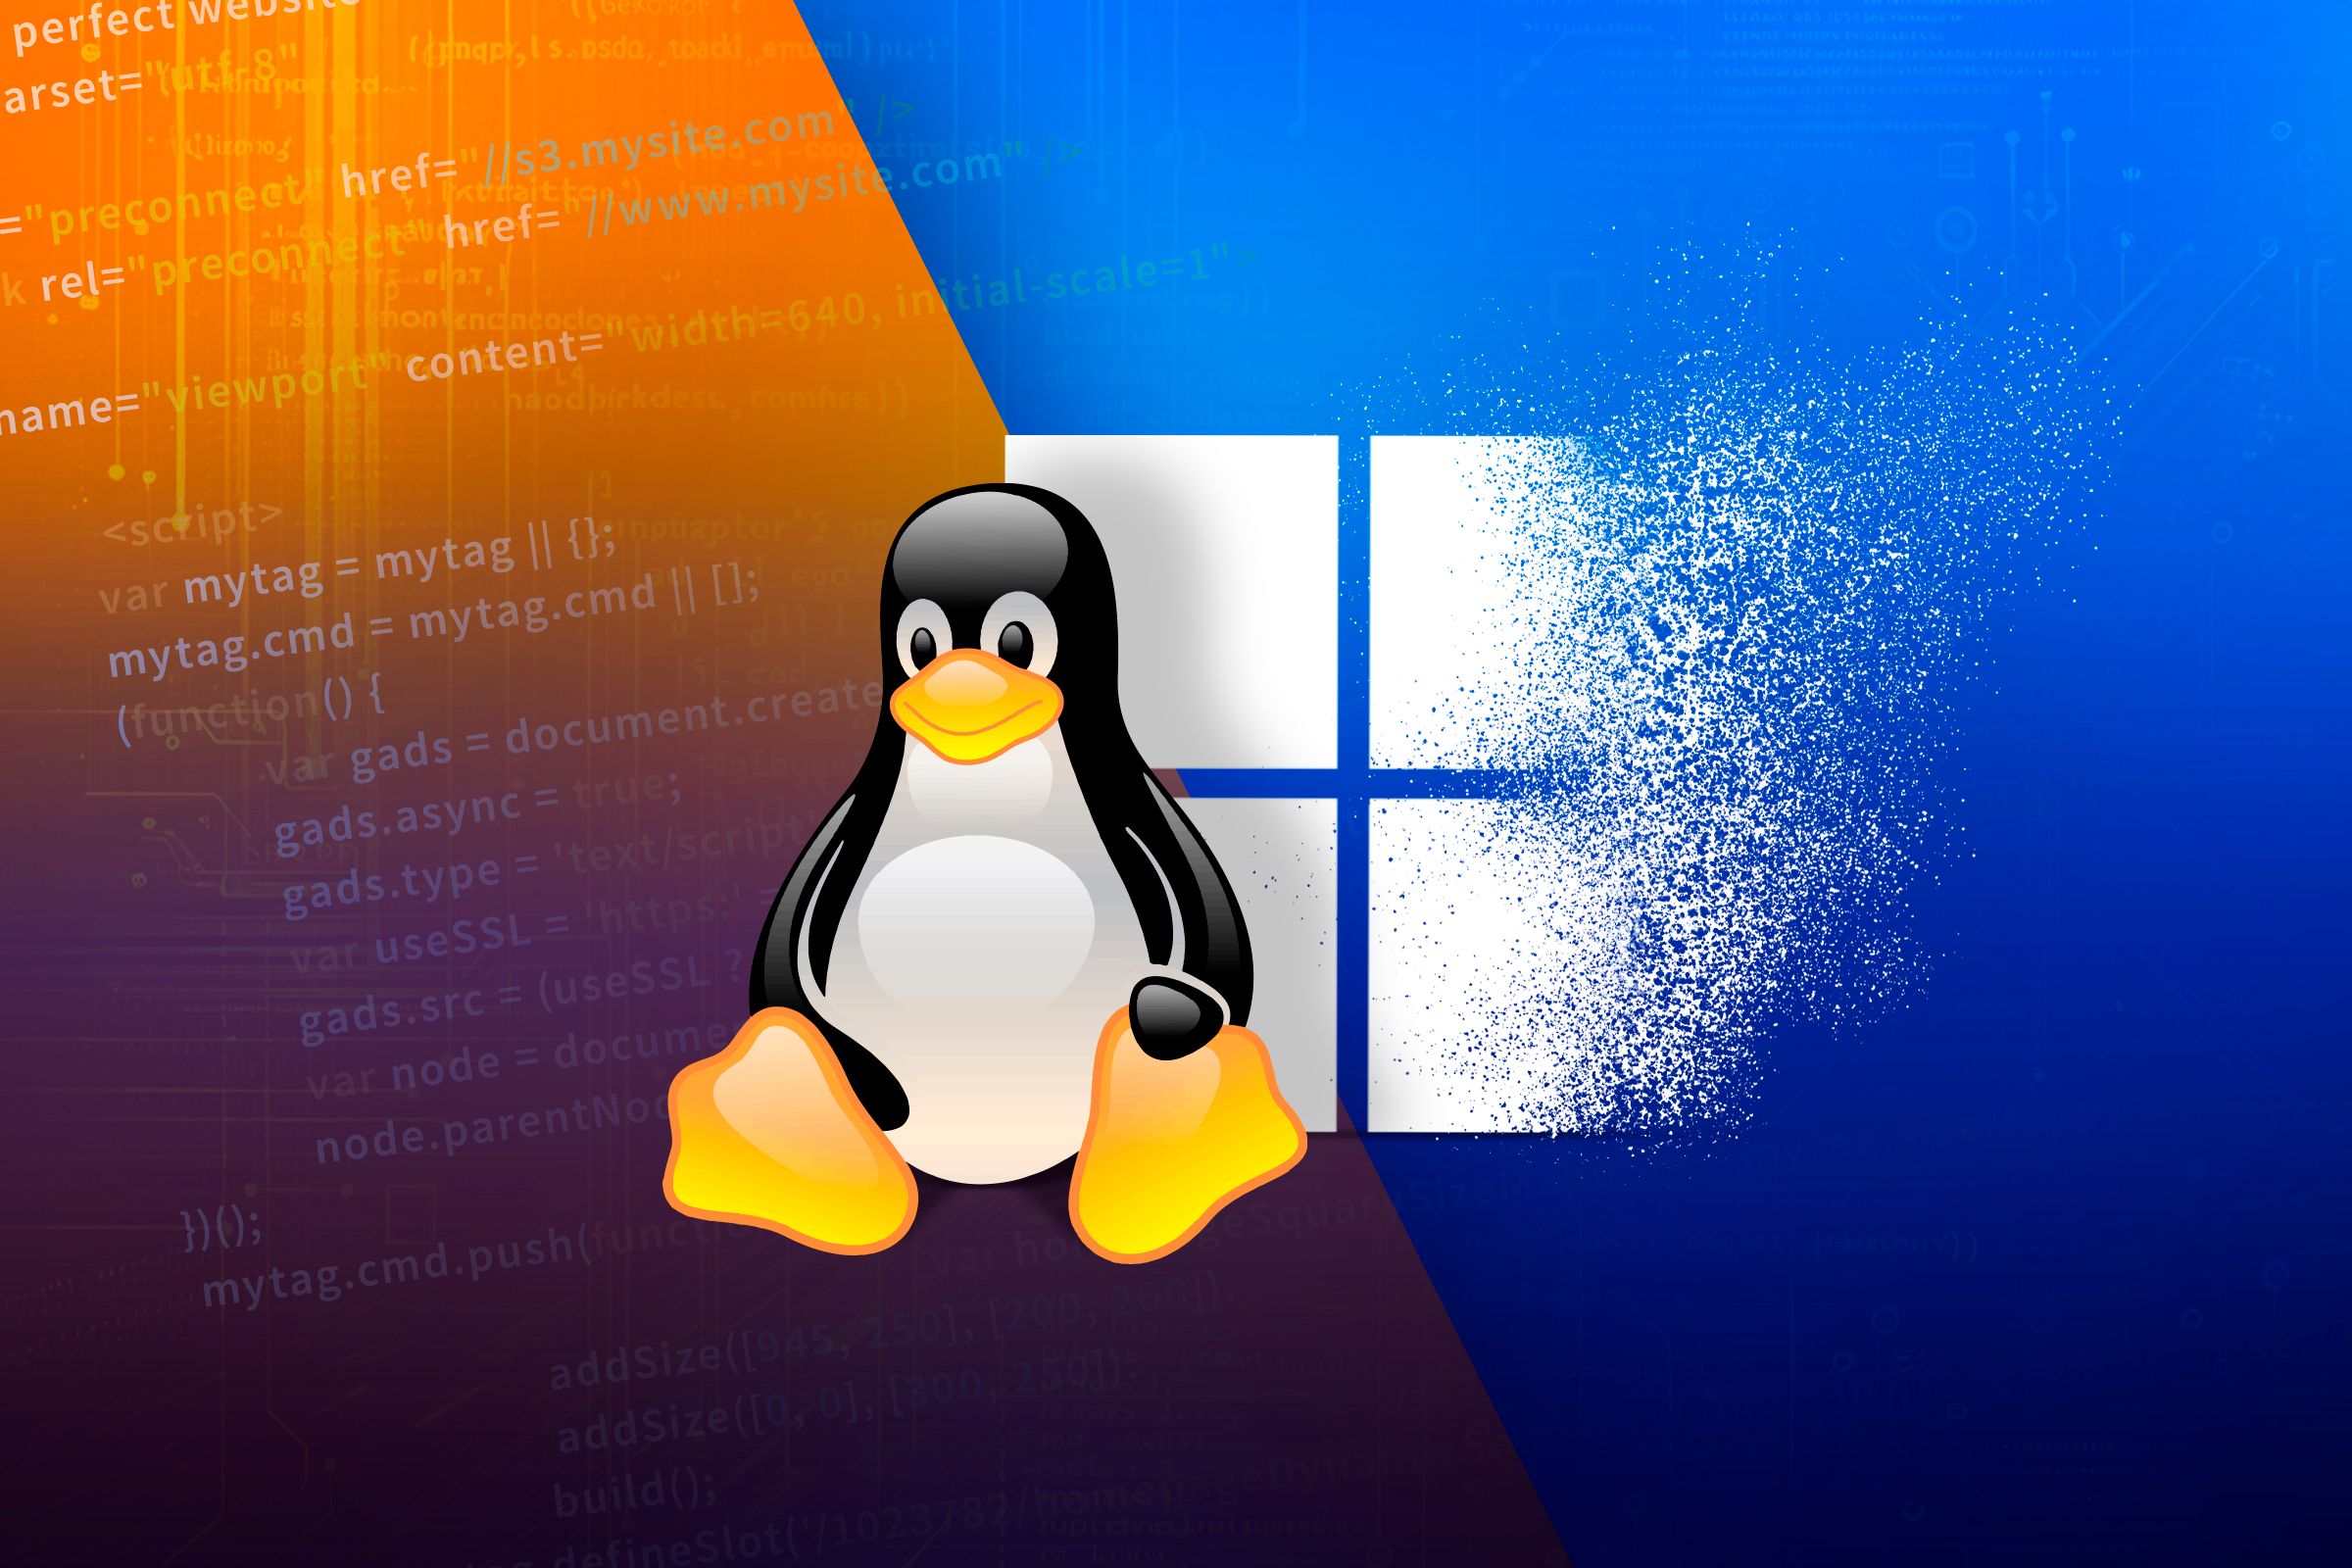 The Linux penguin and behind him, the Windows logo disintegrating